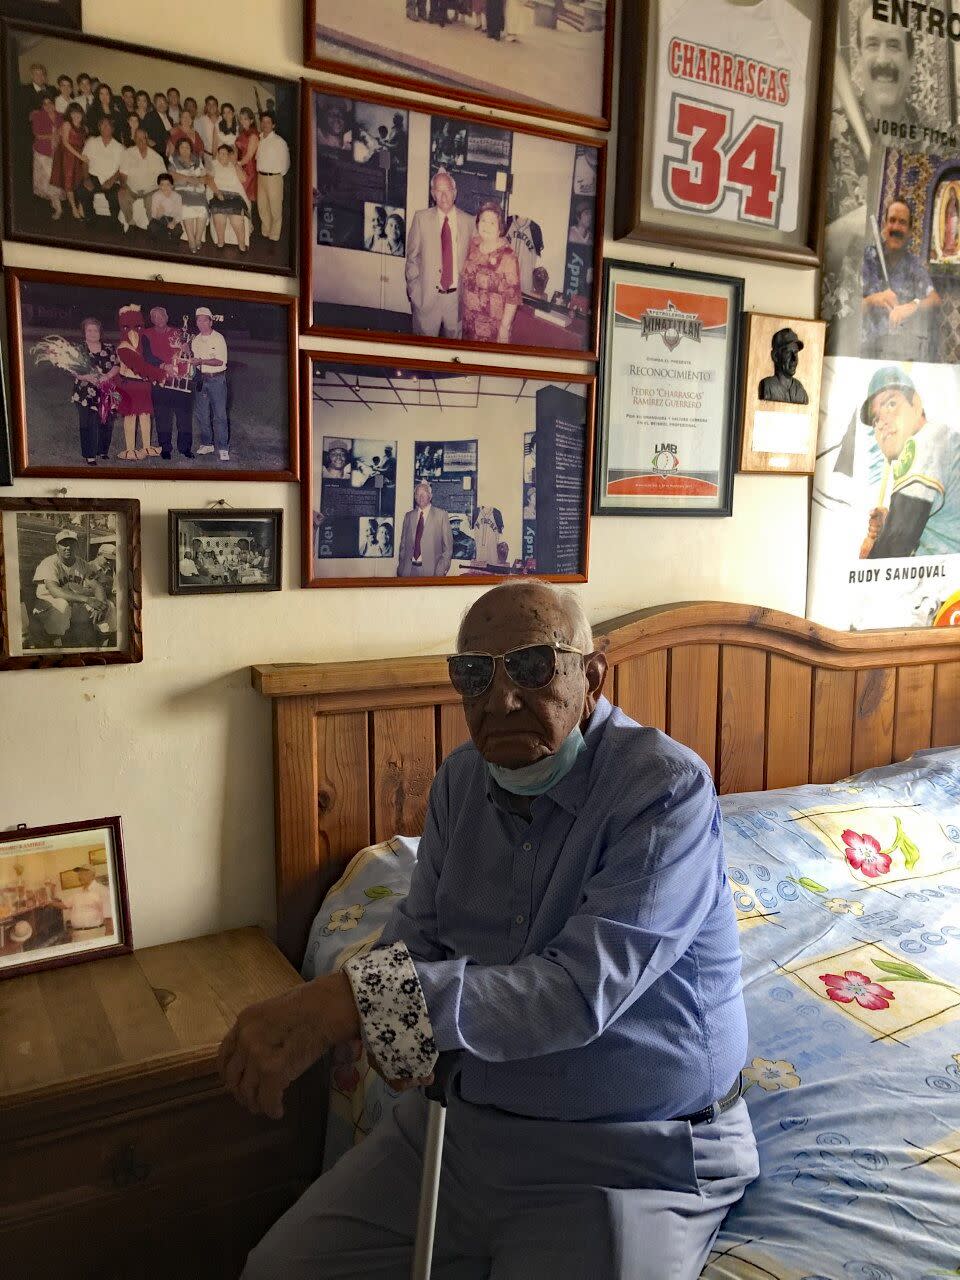 Pedro &quot;Charrascas&quot; Ramírez sits in his home next to photos of his family and baseball memorabilia. 2022.